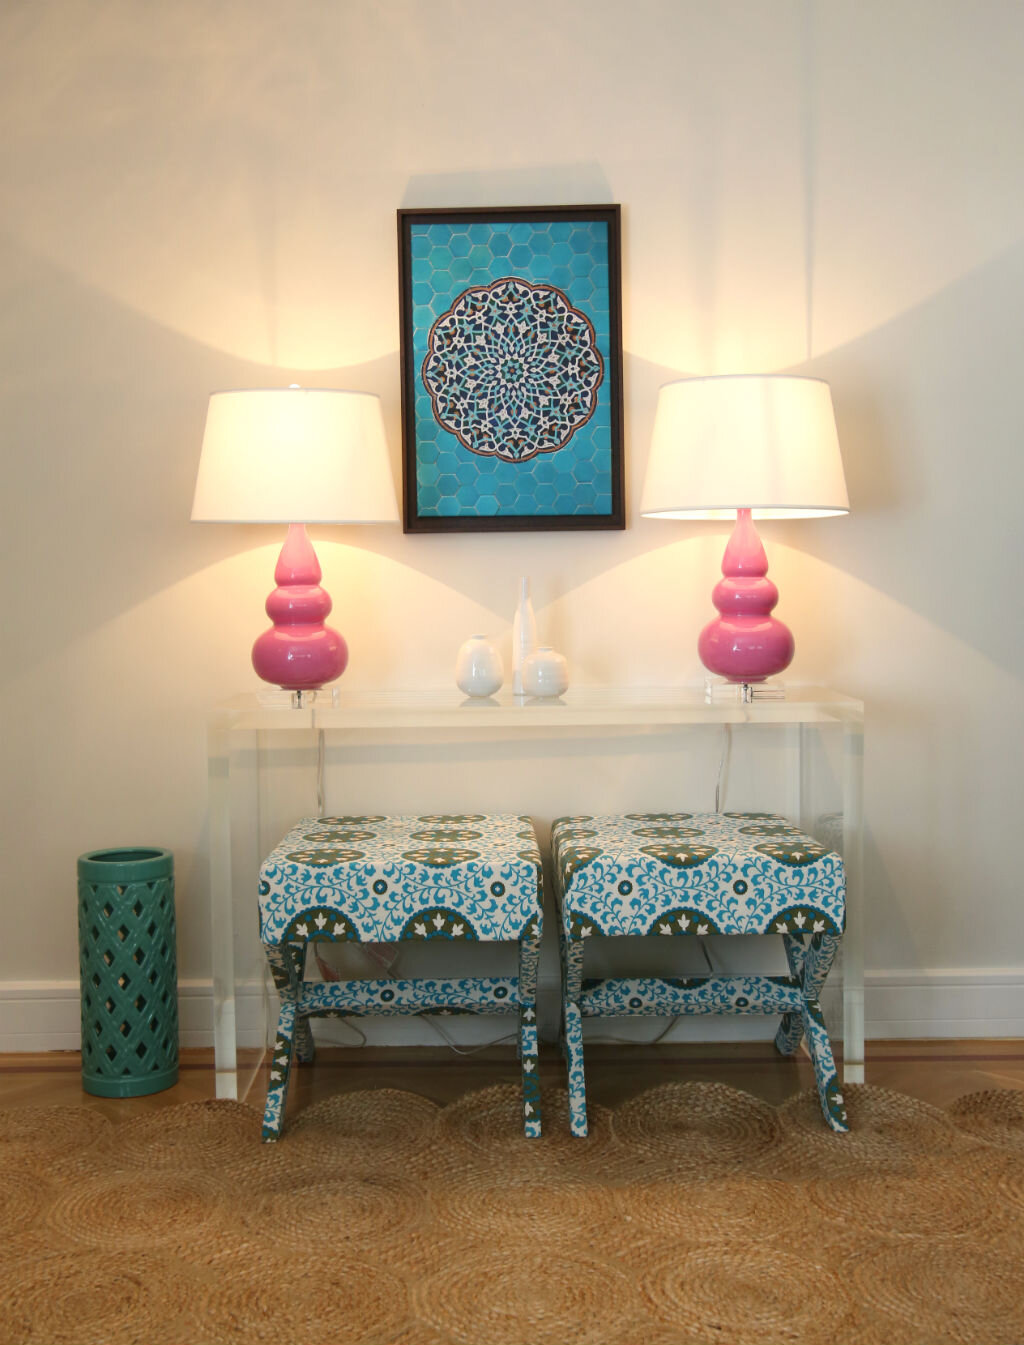 Pair of pink lamps and floral stools in entry 